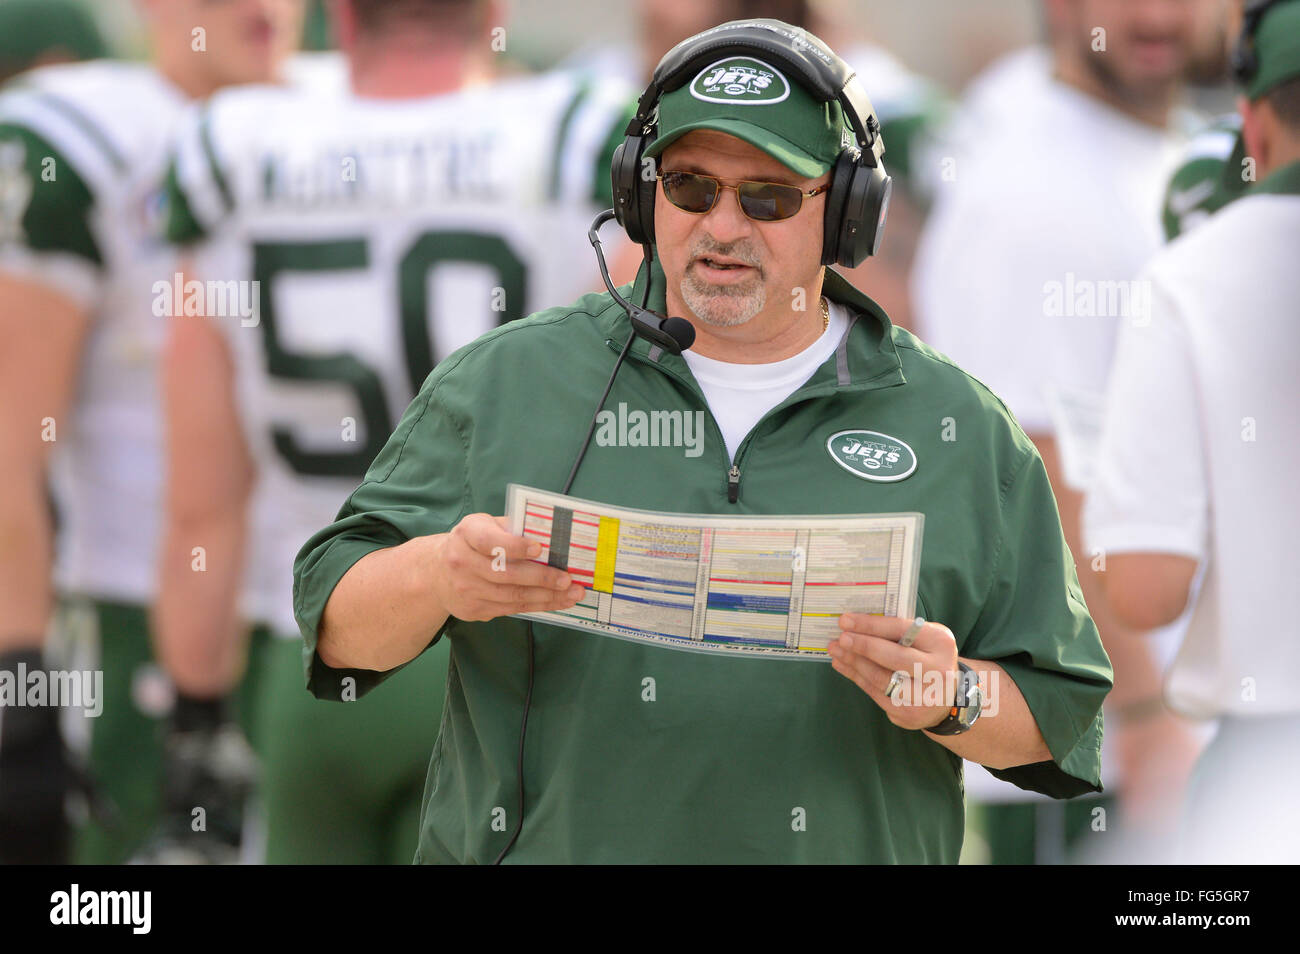 Jacksonville, FL, USA. 9th Dec, 2012. New York Jets offensive coordinator Tony Sparano during an NFL game against the Jacksonville Jaguars at EverBank Field on Dec 9, 2012 in Jacksonville, Florida. The Jets won 17-10.ZUMA Press/Scott A. Miller. © Scott A. Miller/ZUMA Wire/Alamy Live News Stock Photo